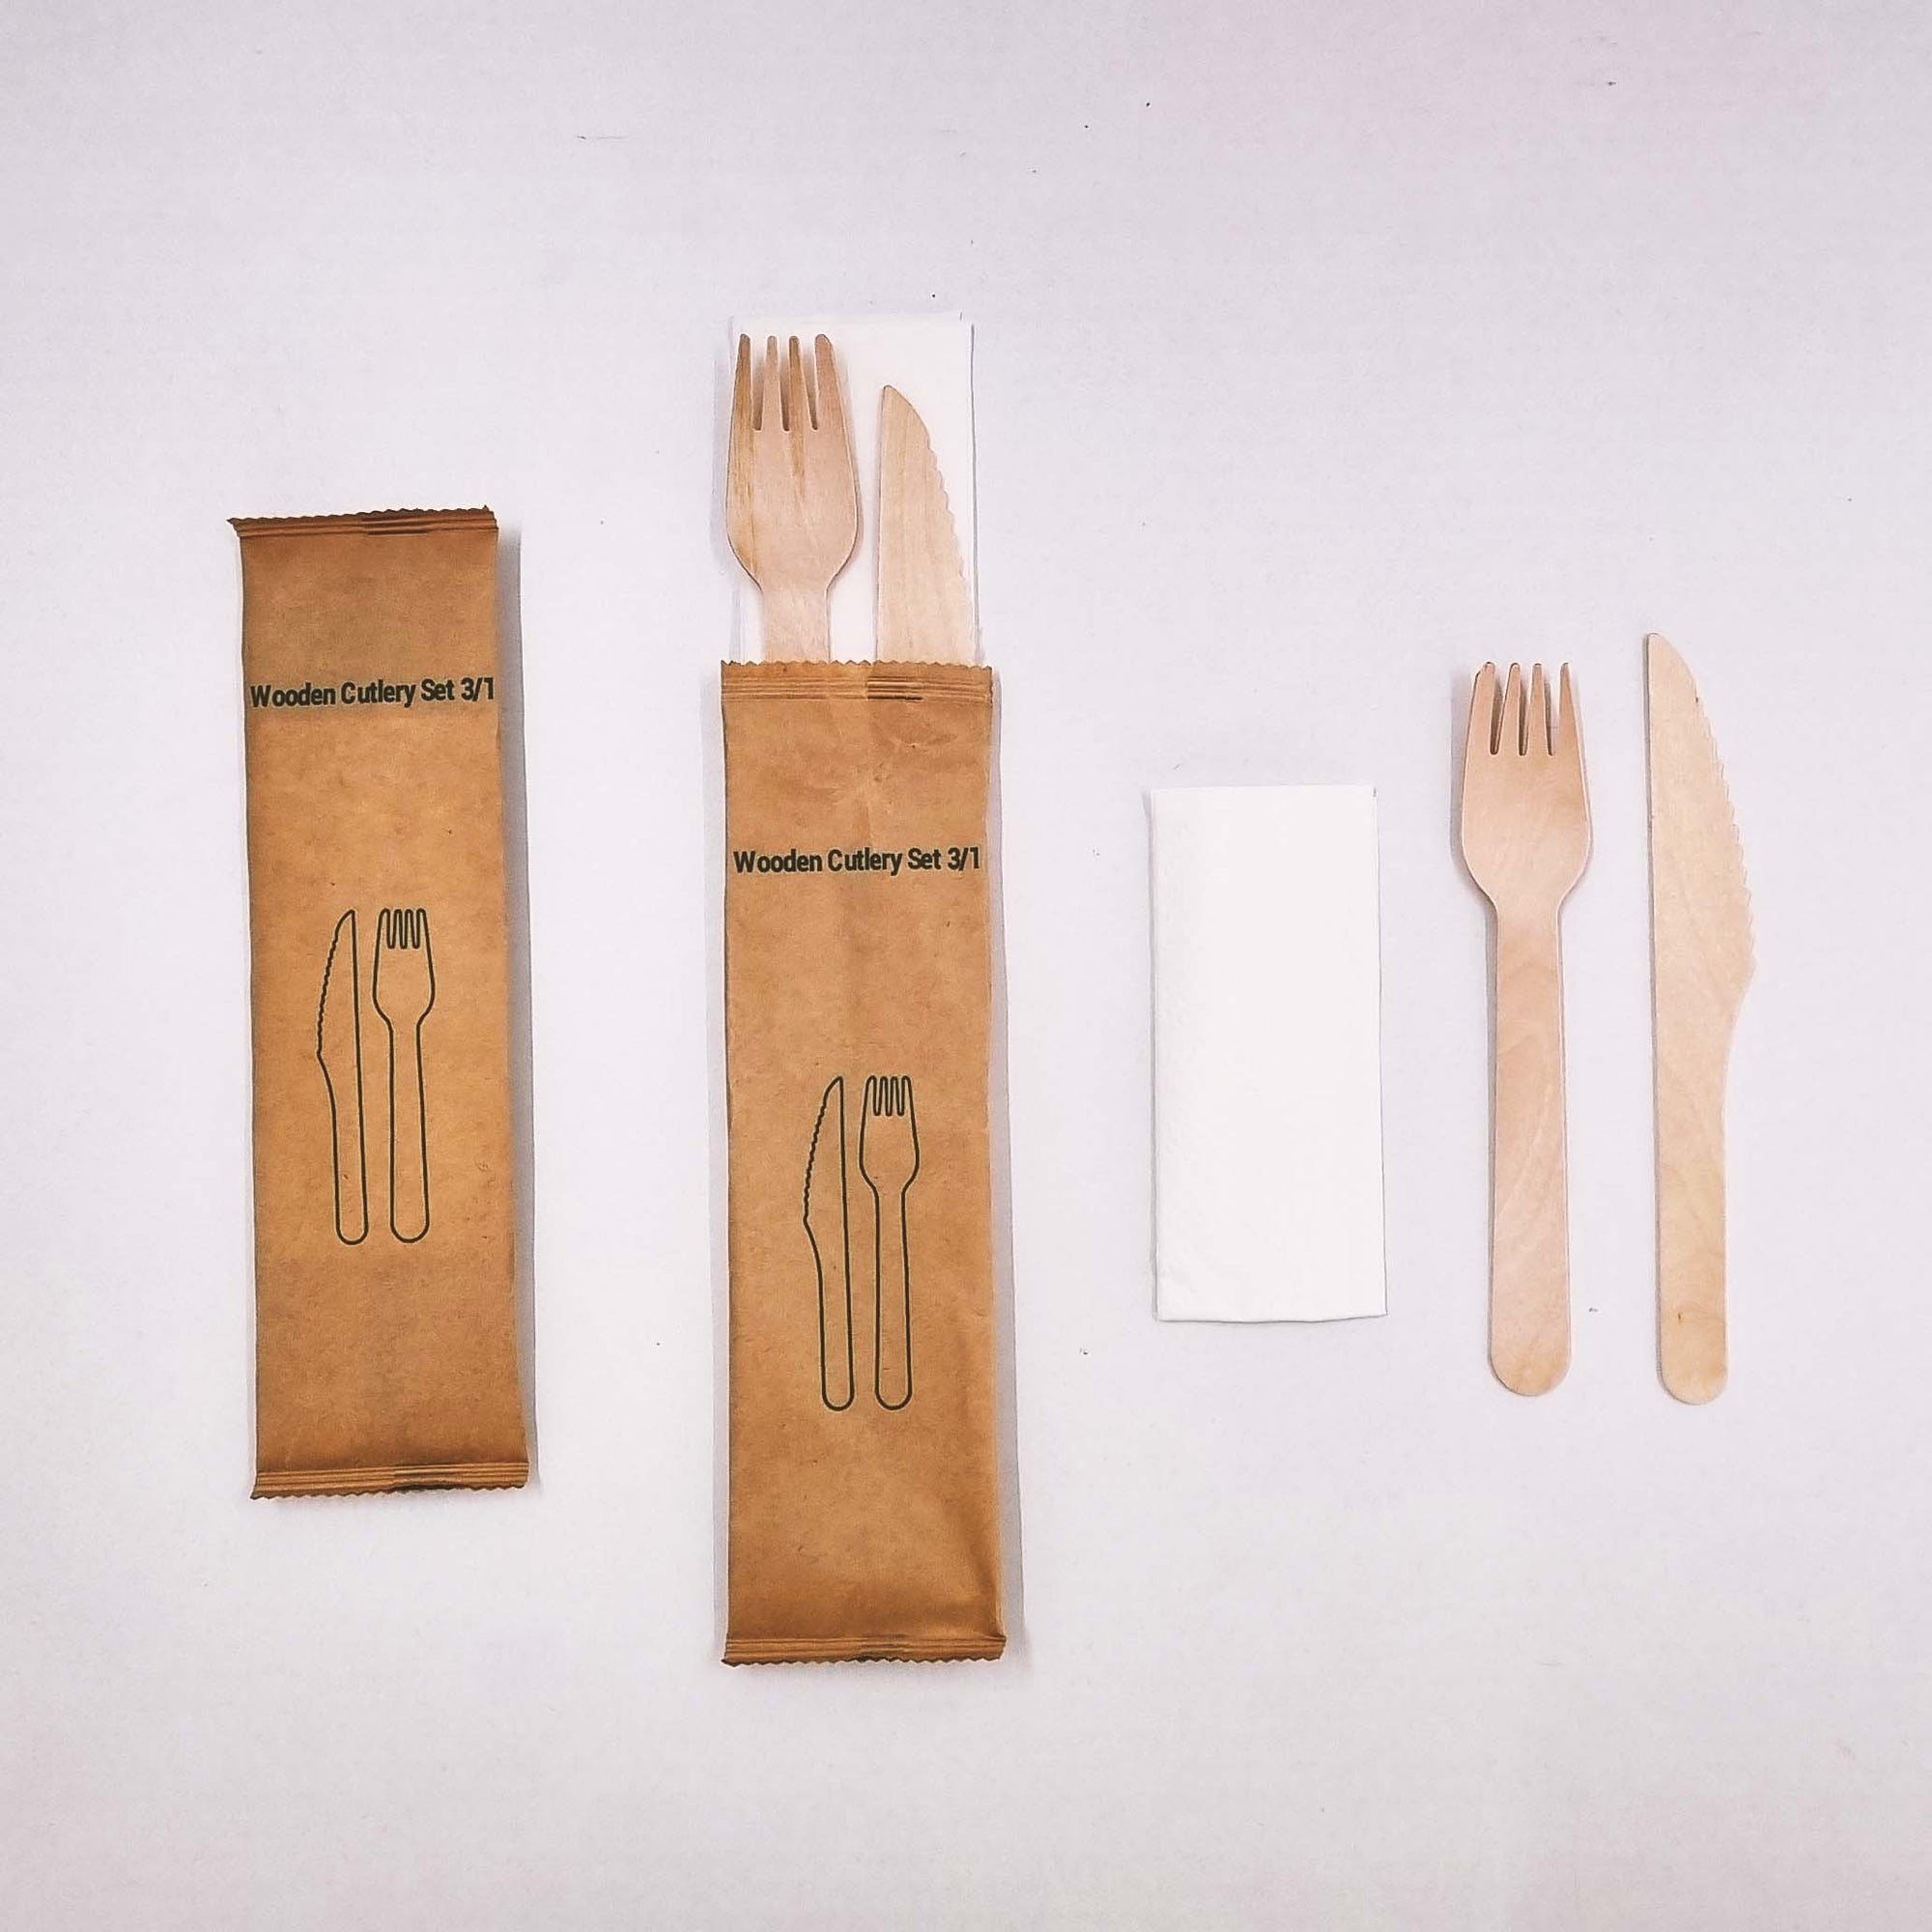 Wooden Cutlery Pack 3/1